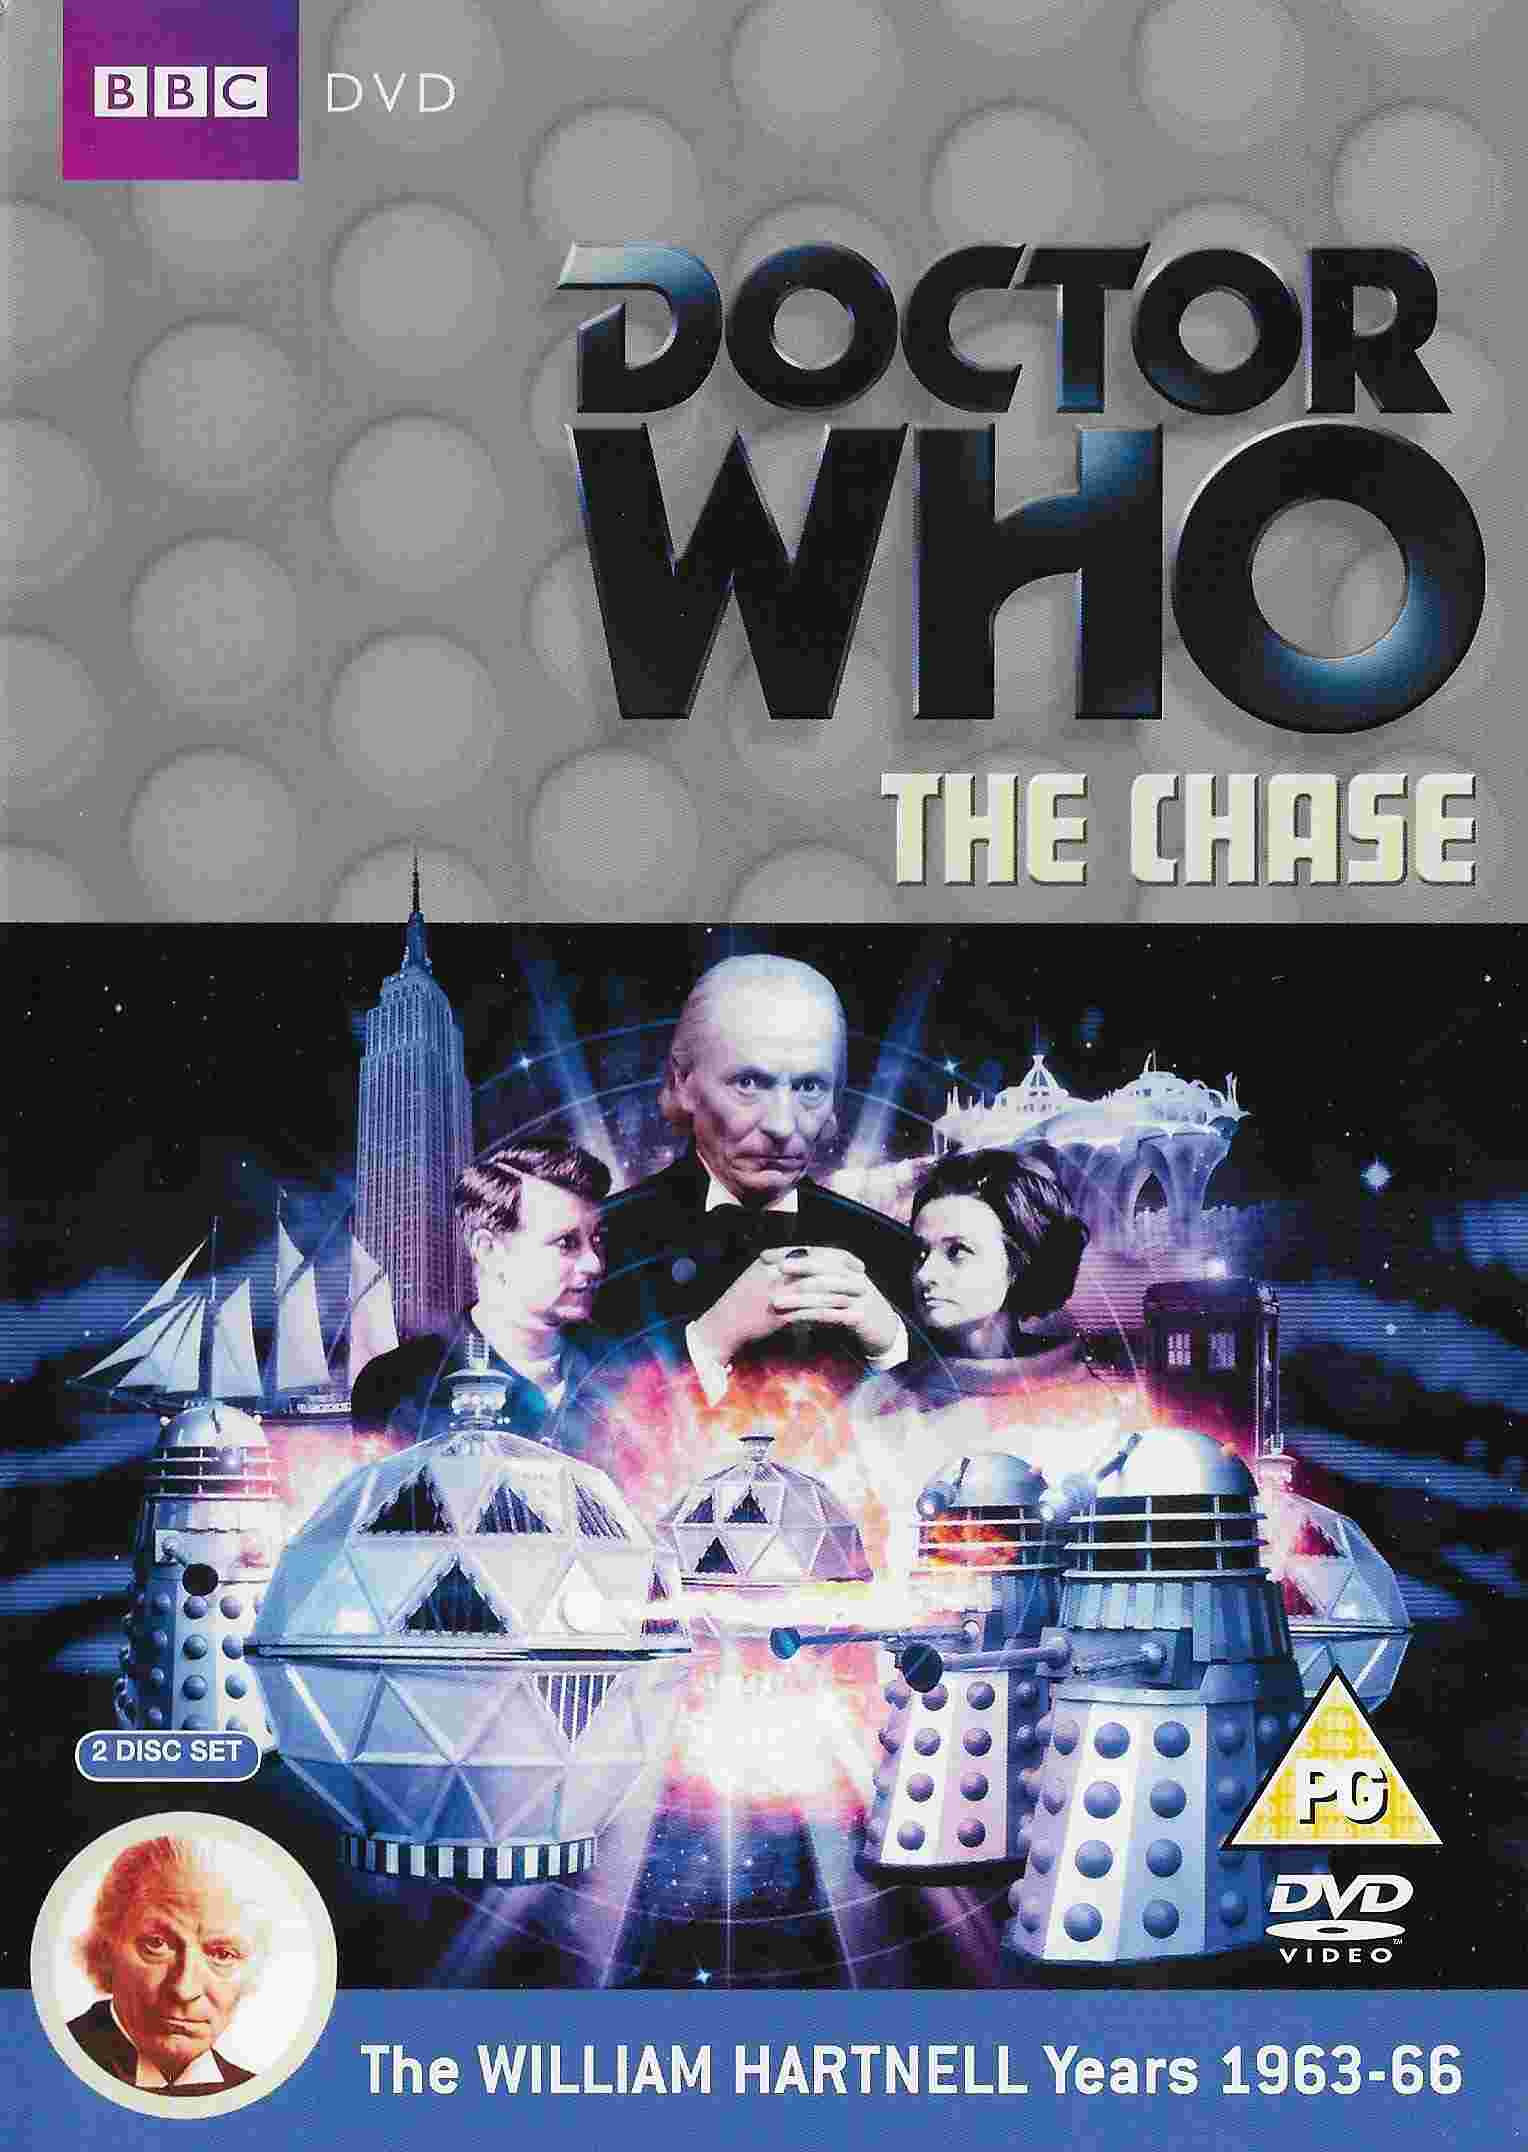 Front cover of BBCDVD 2809B